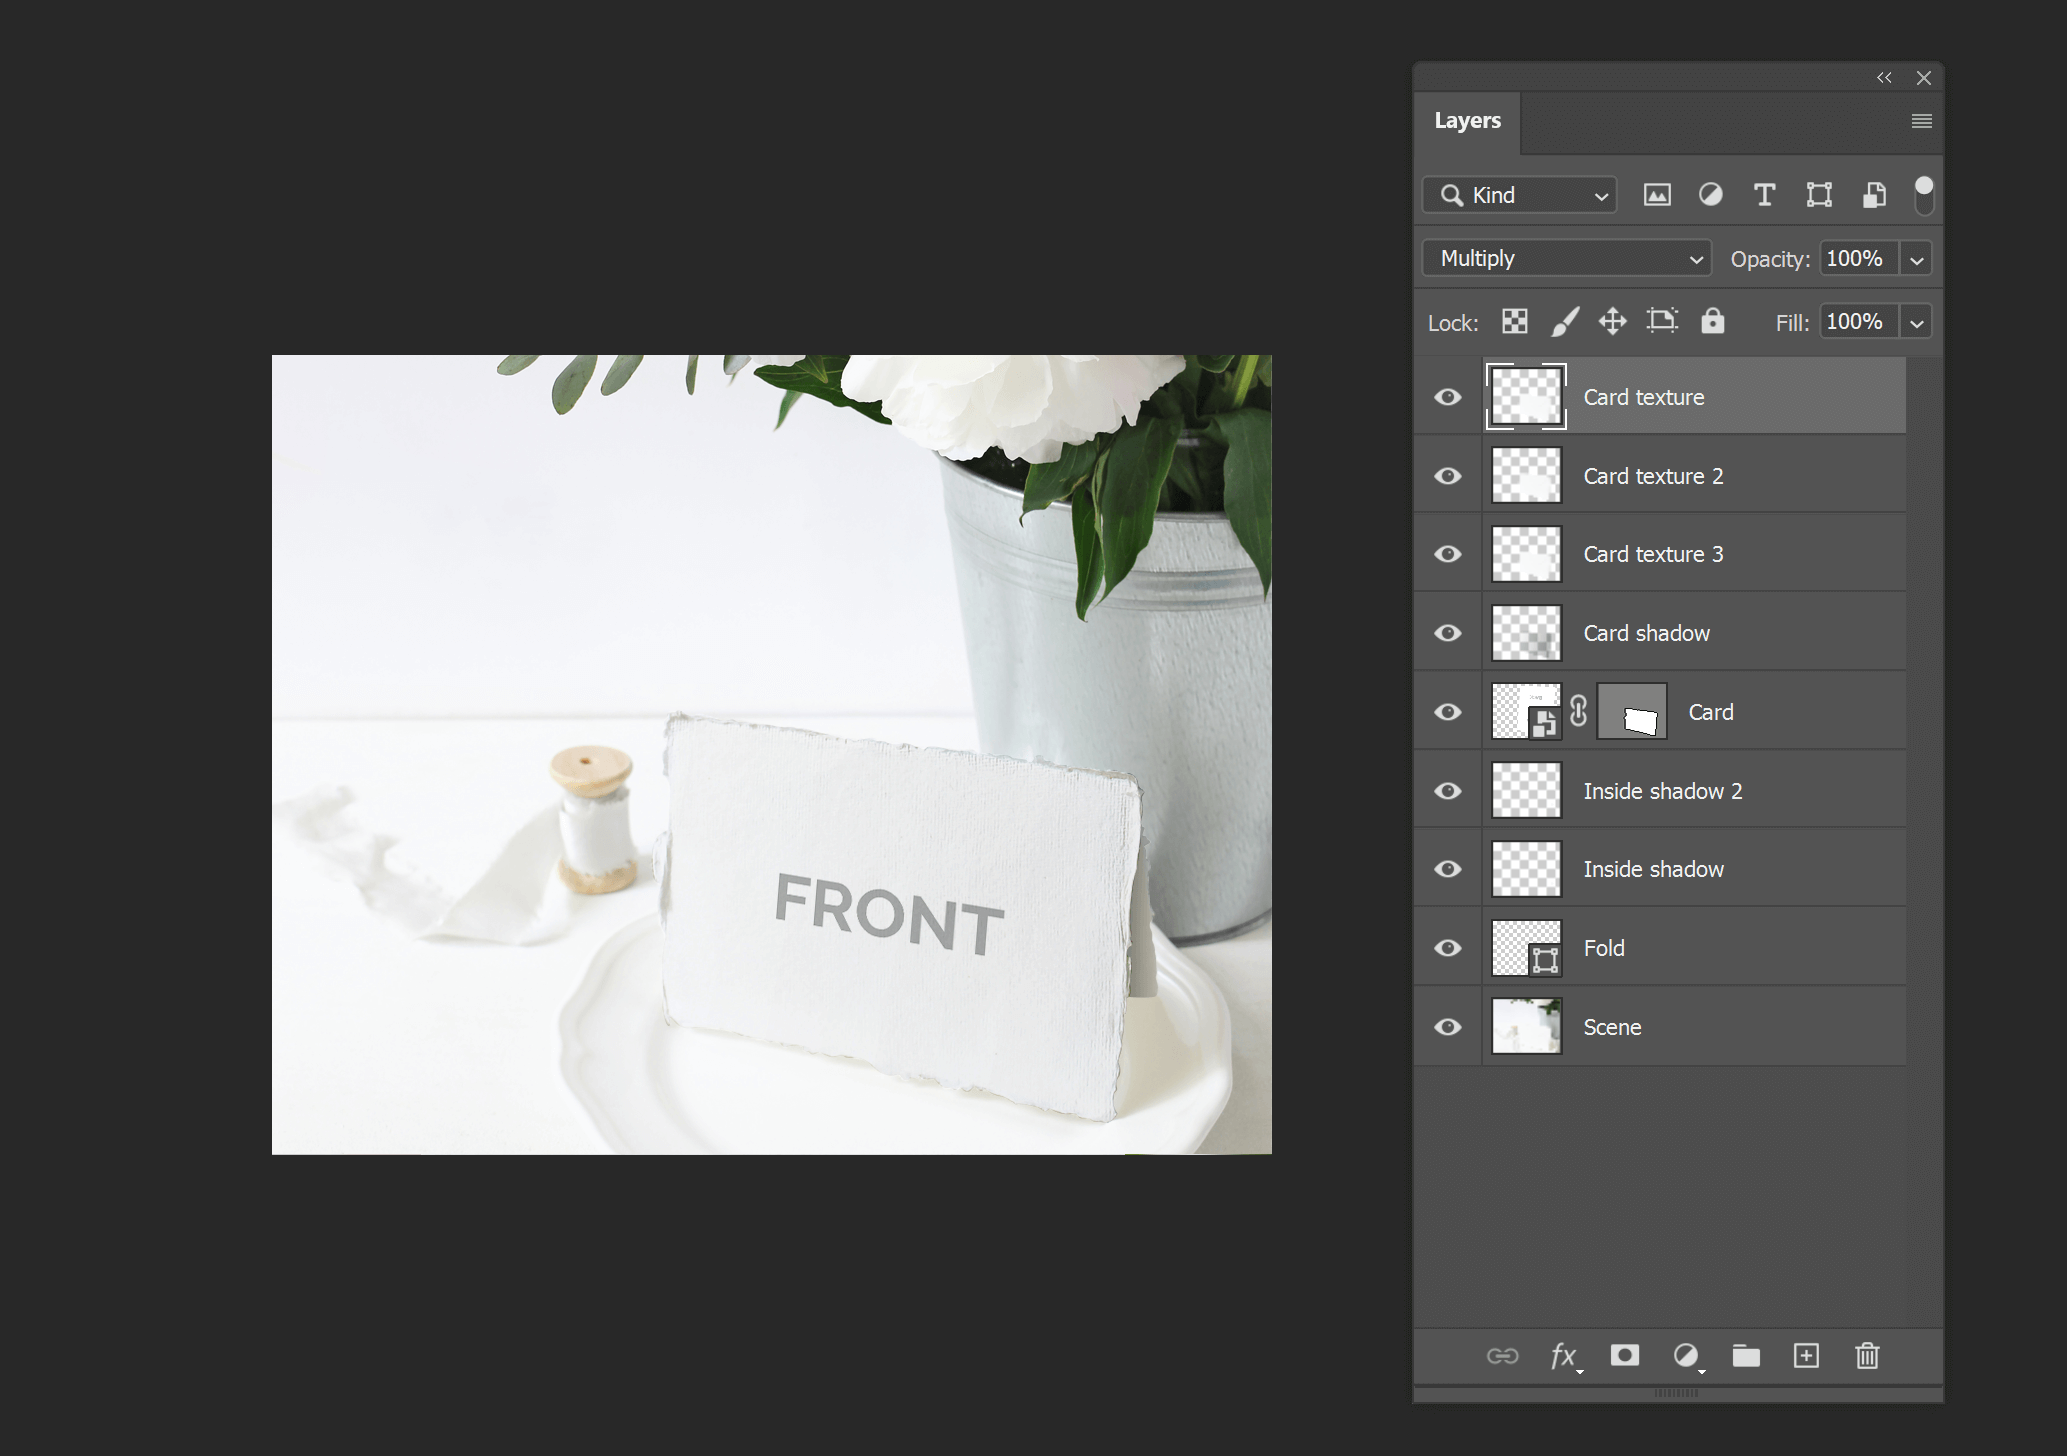 Preview mockup in Photoshop